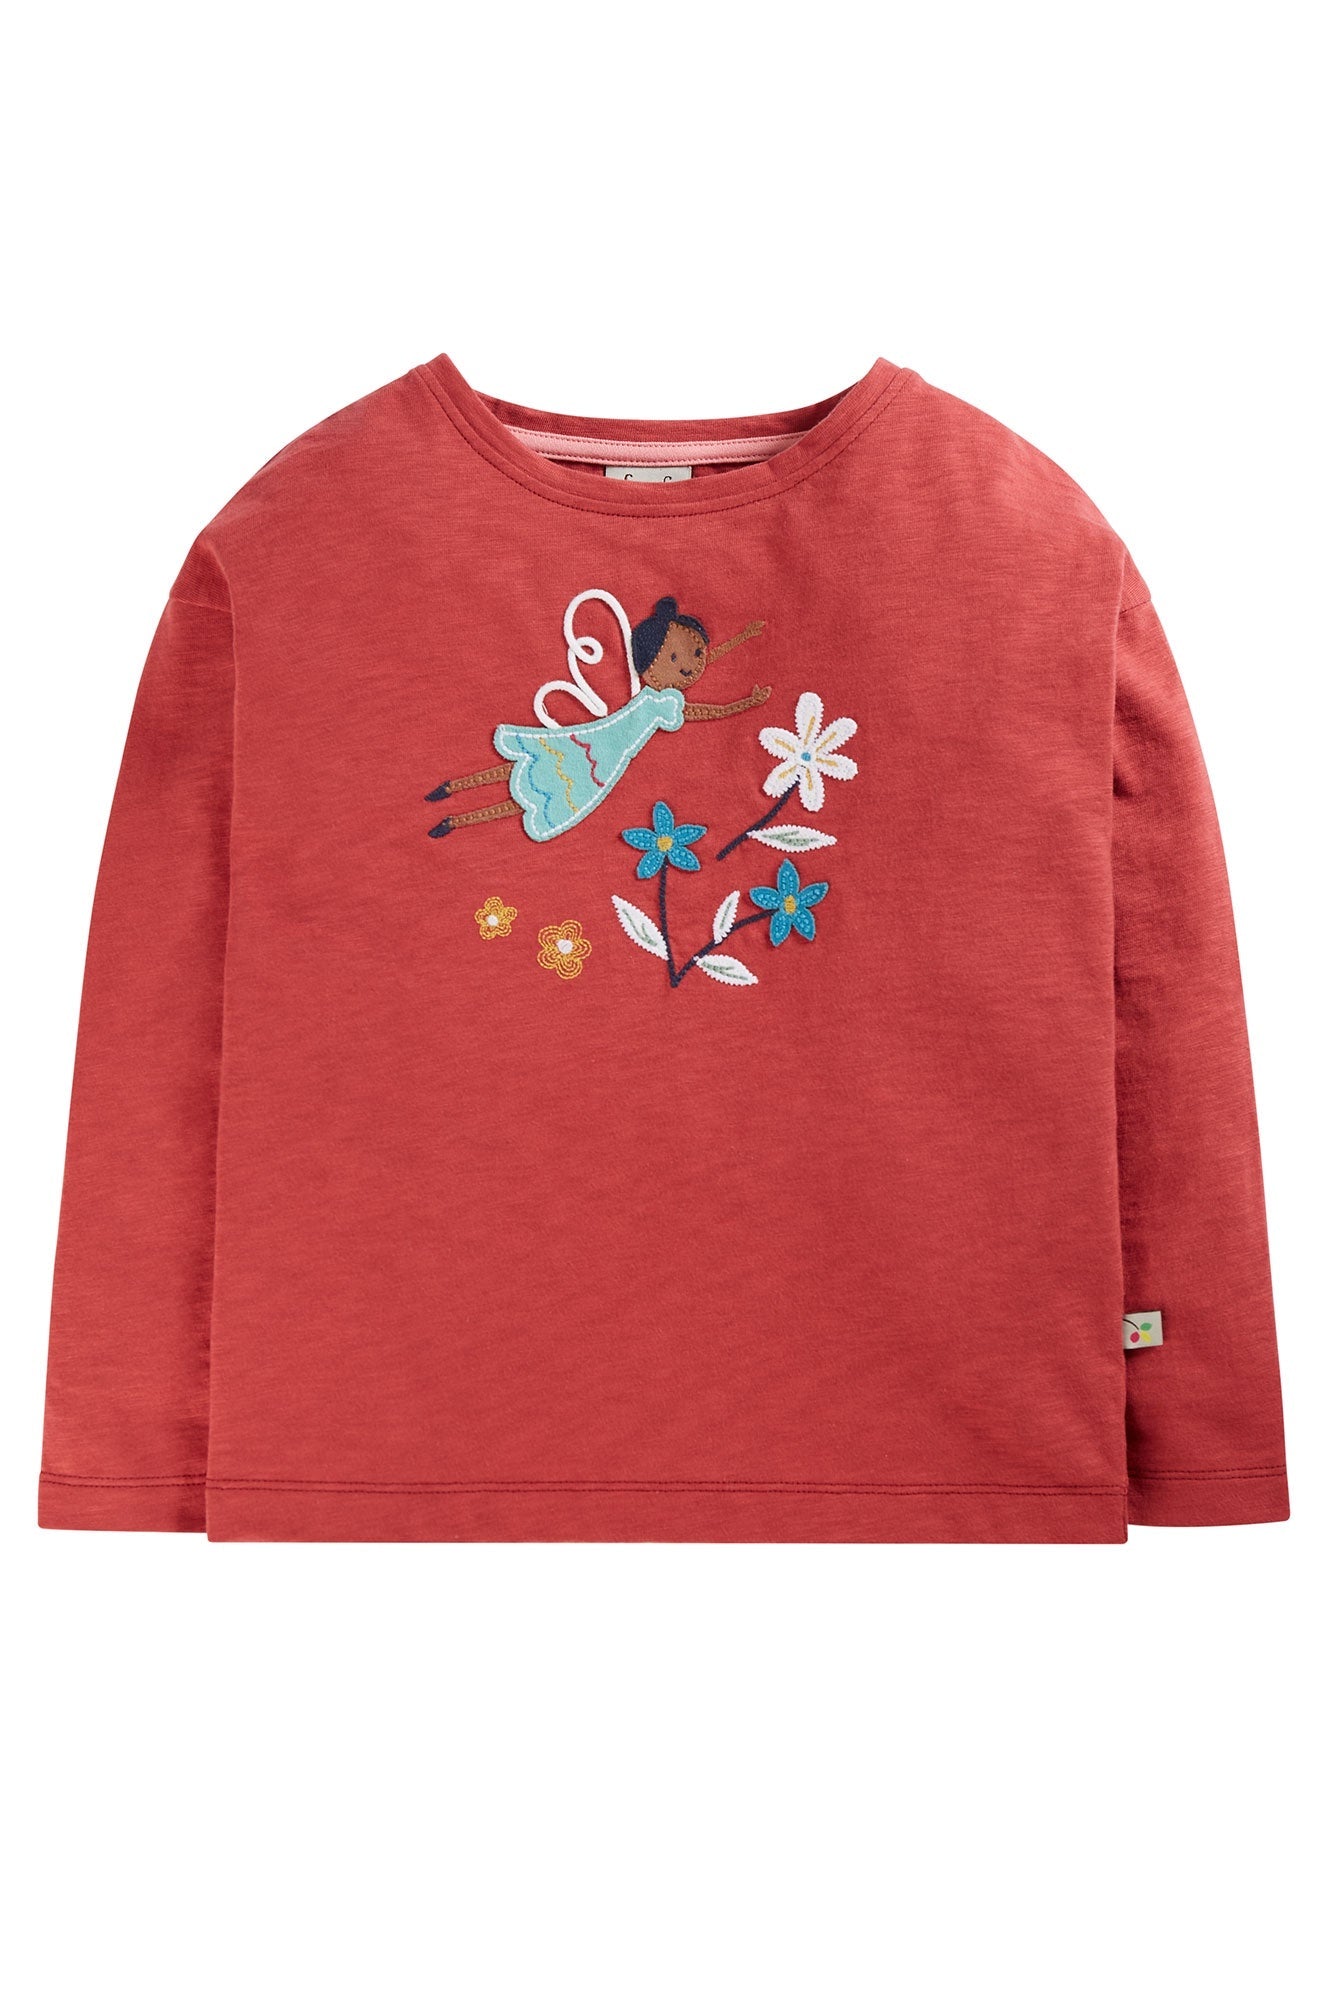 Frugi Bethia Top in Rosehip/Fairy-Kids-Ohh! By Gum - Shop Sustainable